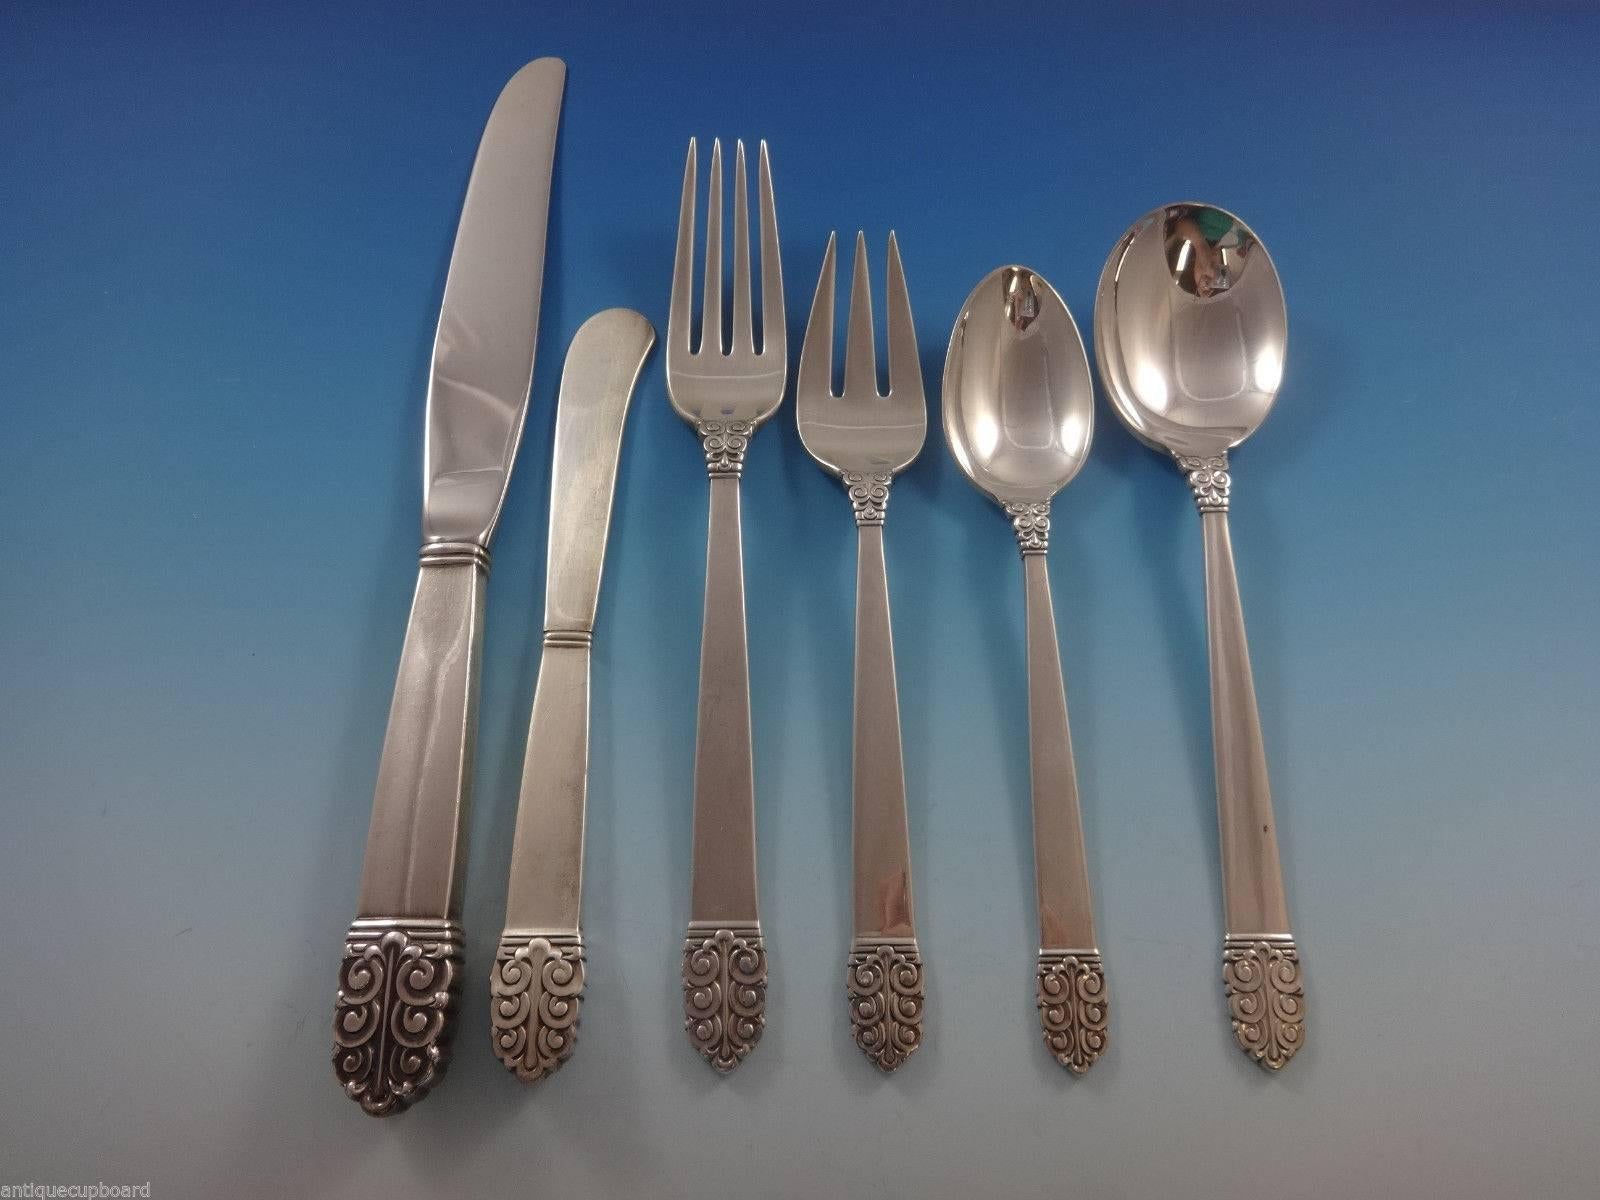 Gorgeous Mid-Century Modern Northern Lights by International sterling silver flatware set of 77 pieces. This set includes:

12 knives, 8 7/8